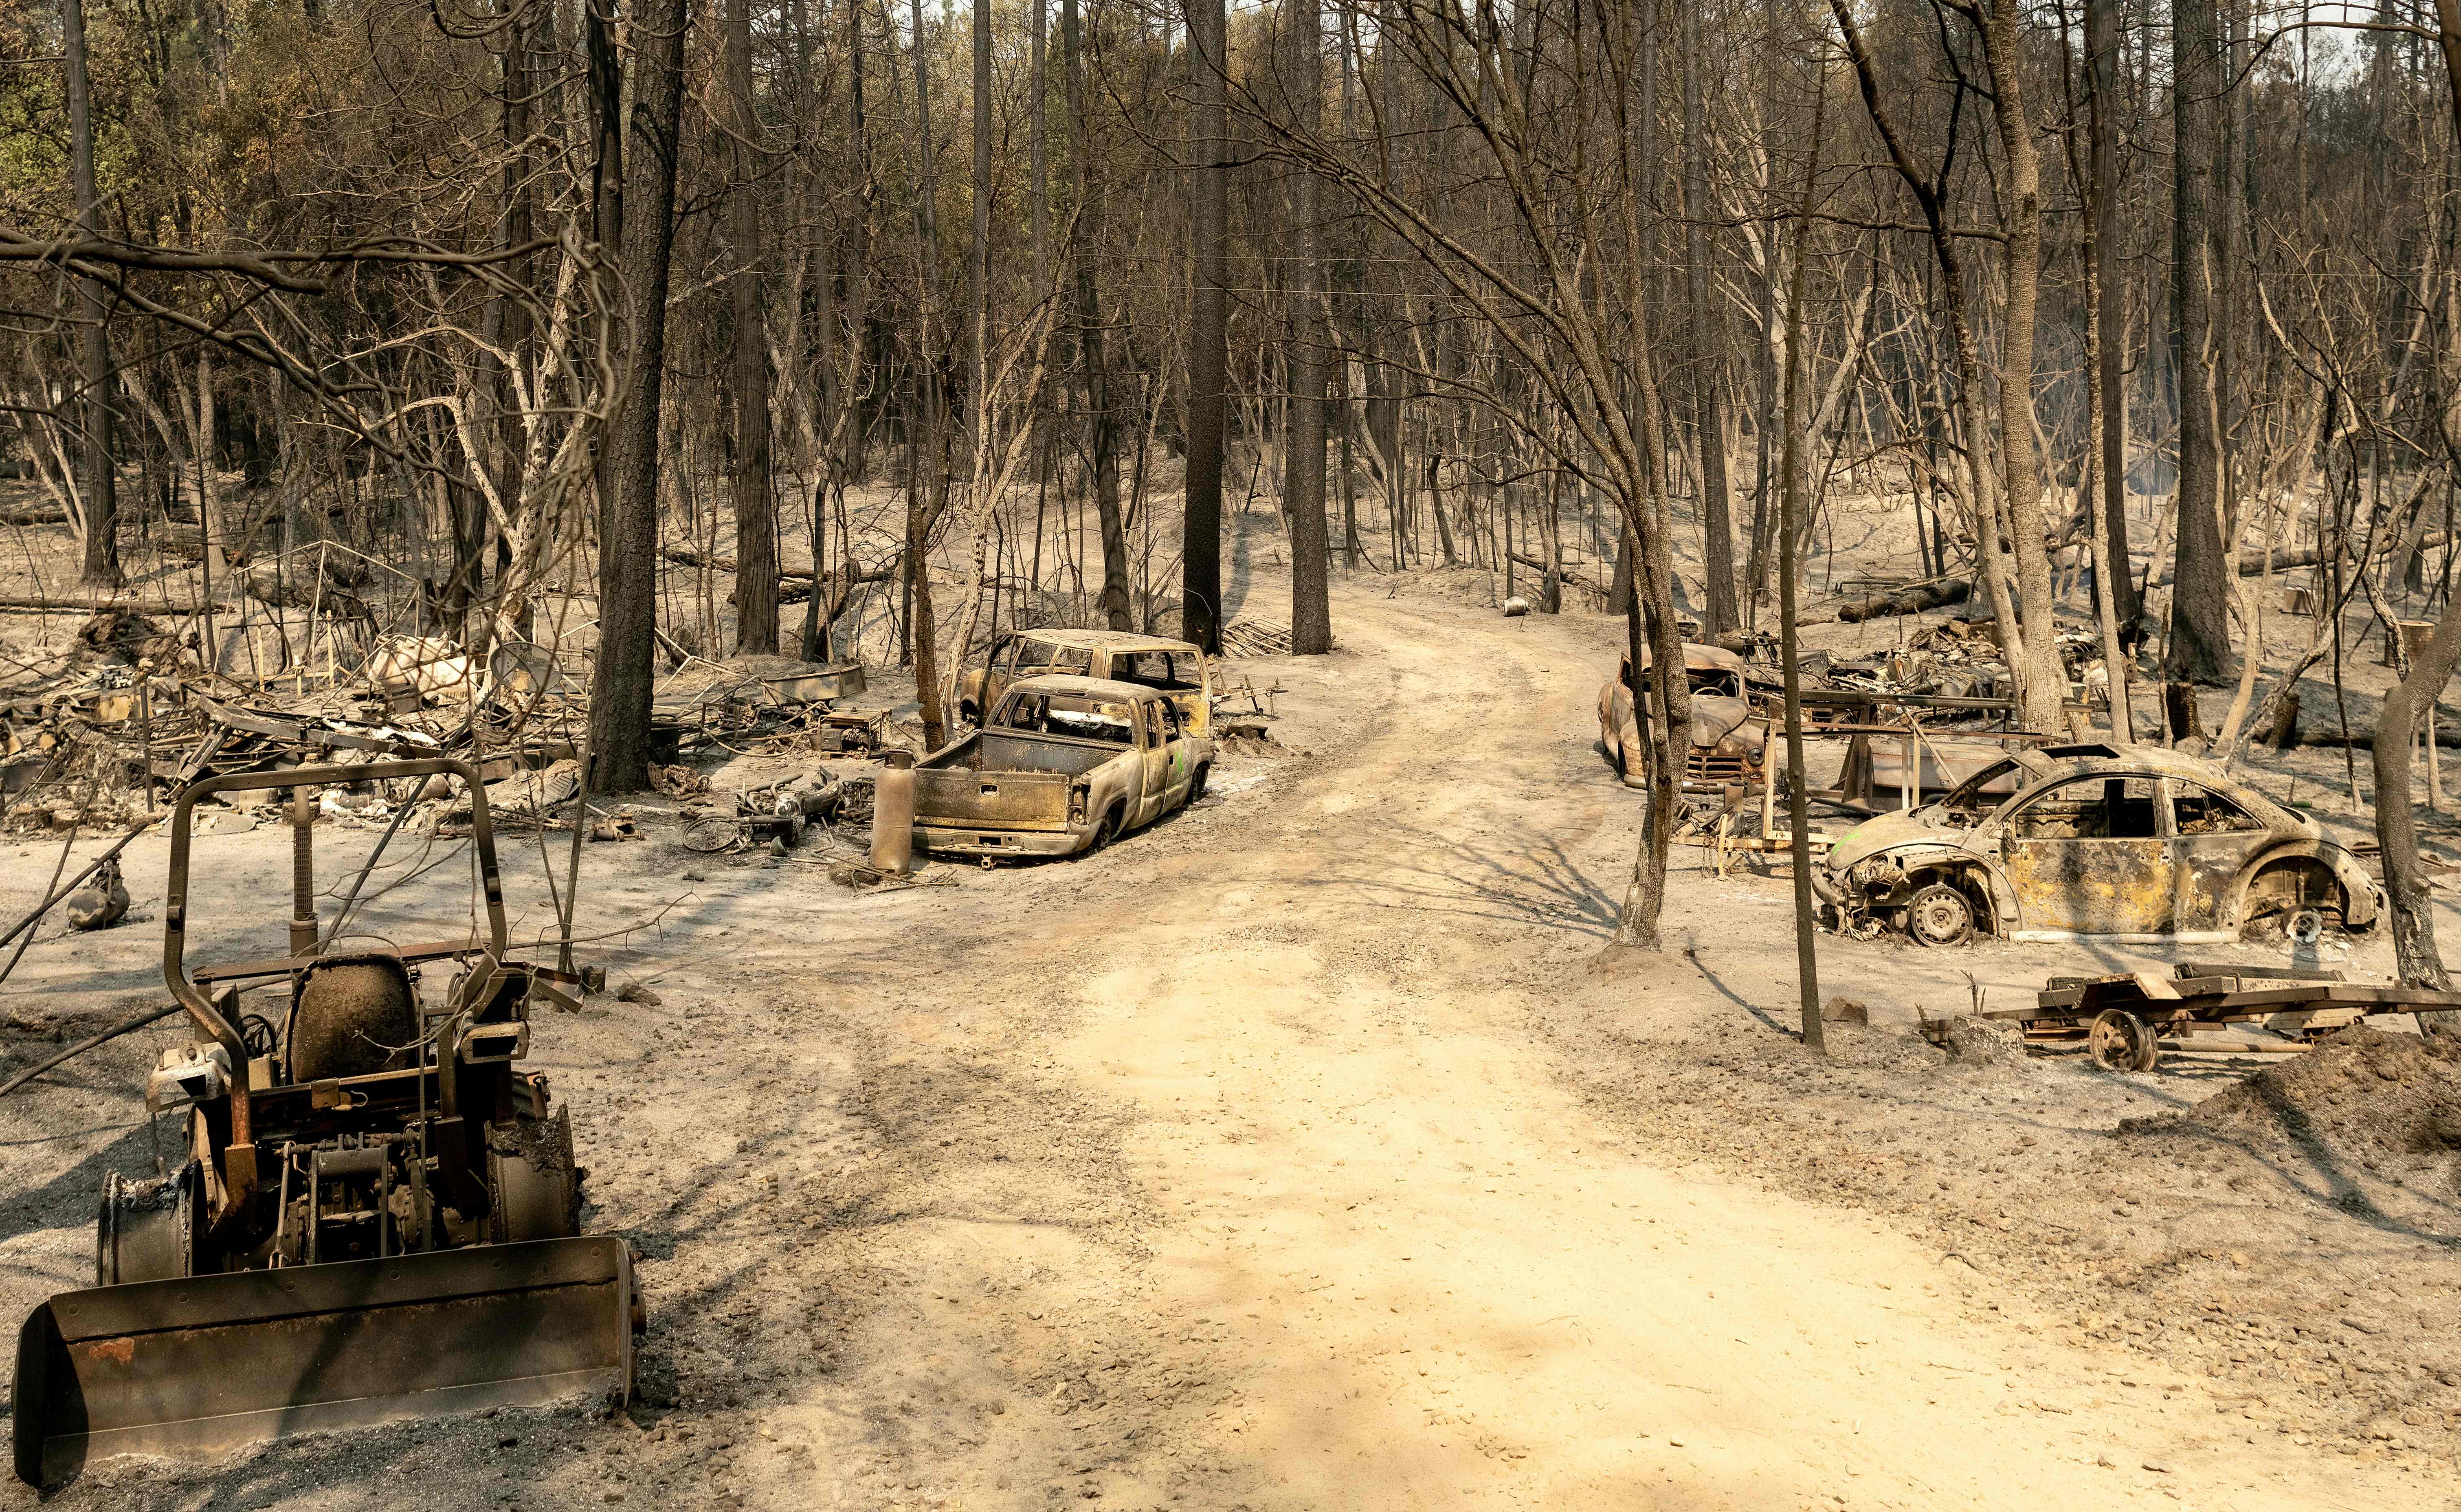 A residential area in the Berry Creek area of northern California smouldering after the Bear Fire tore through the region last September